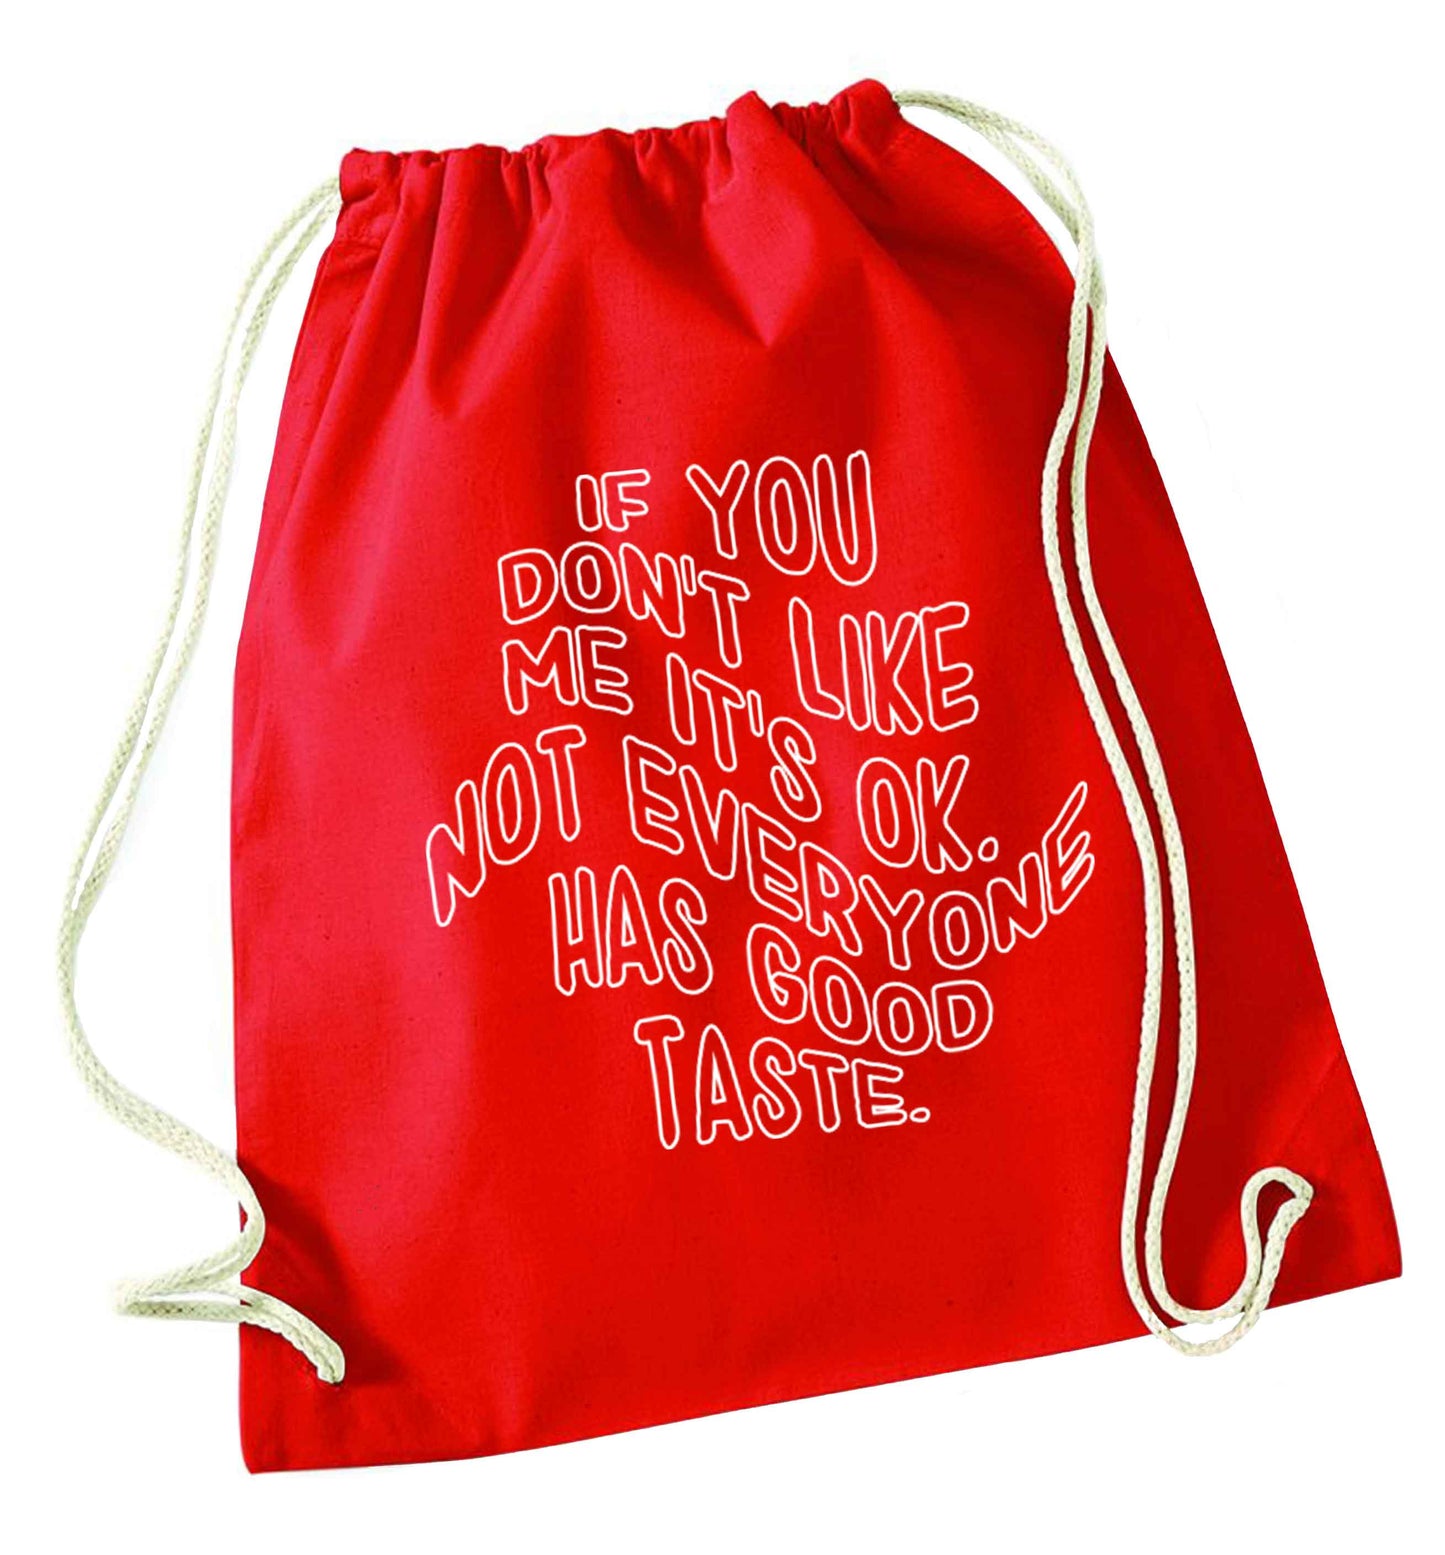 If you don't like me it's ok not everyone has good taste red drawstring bag 